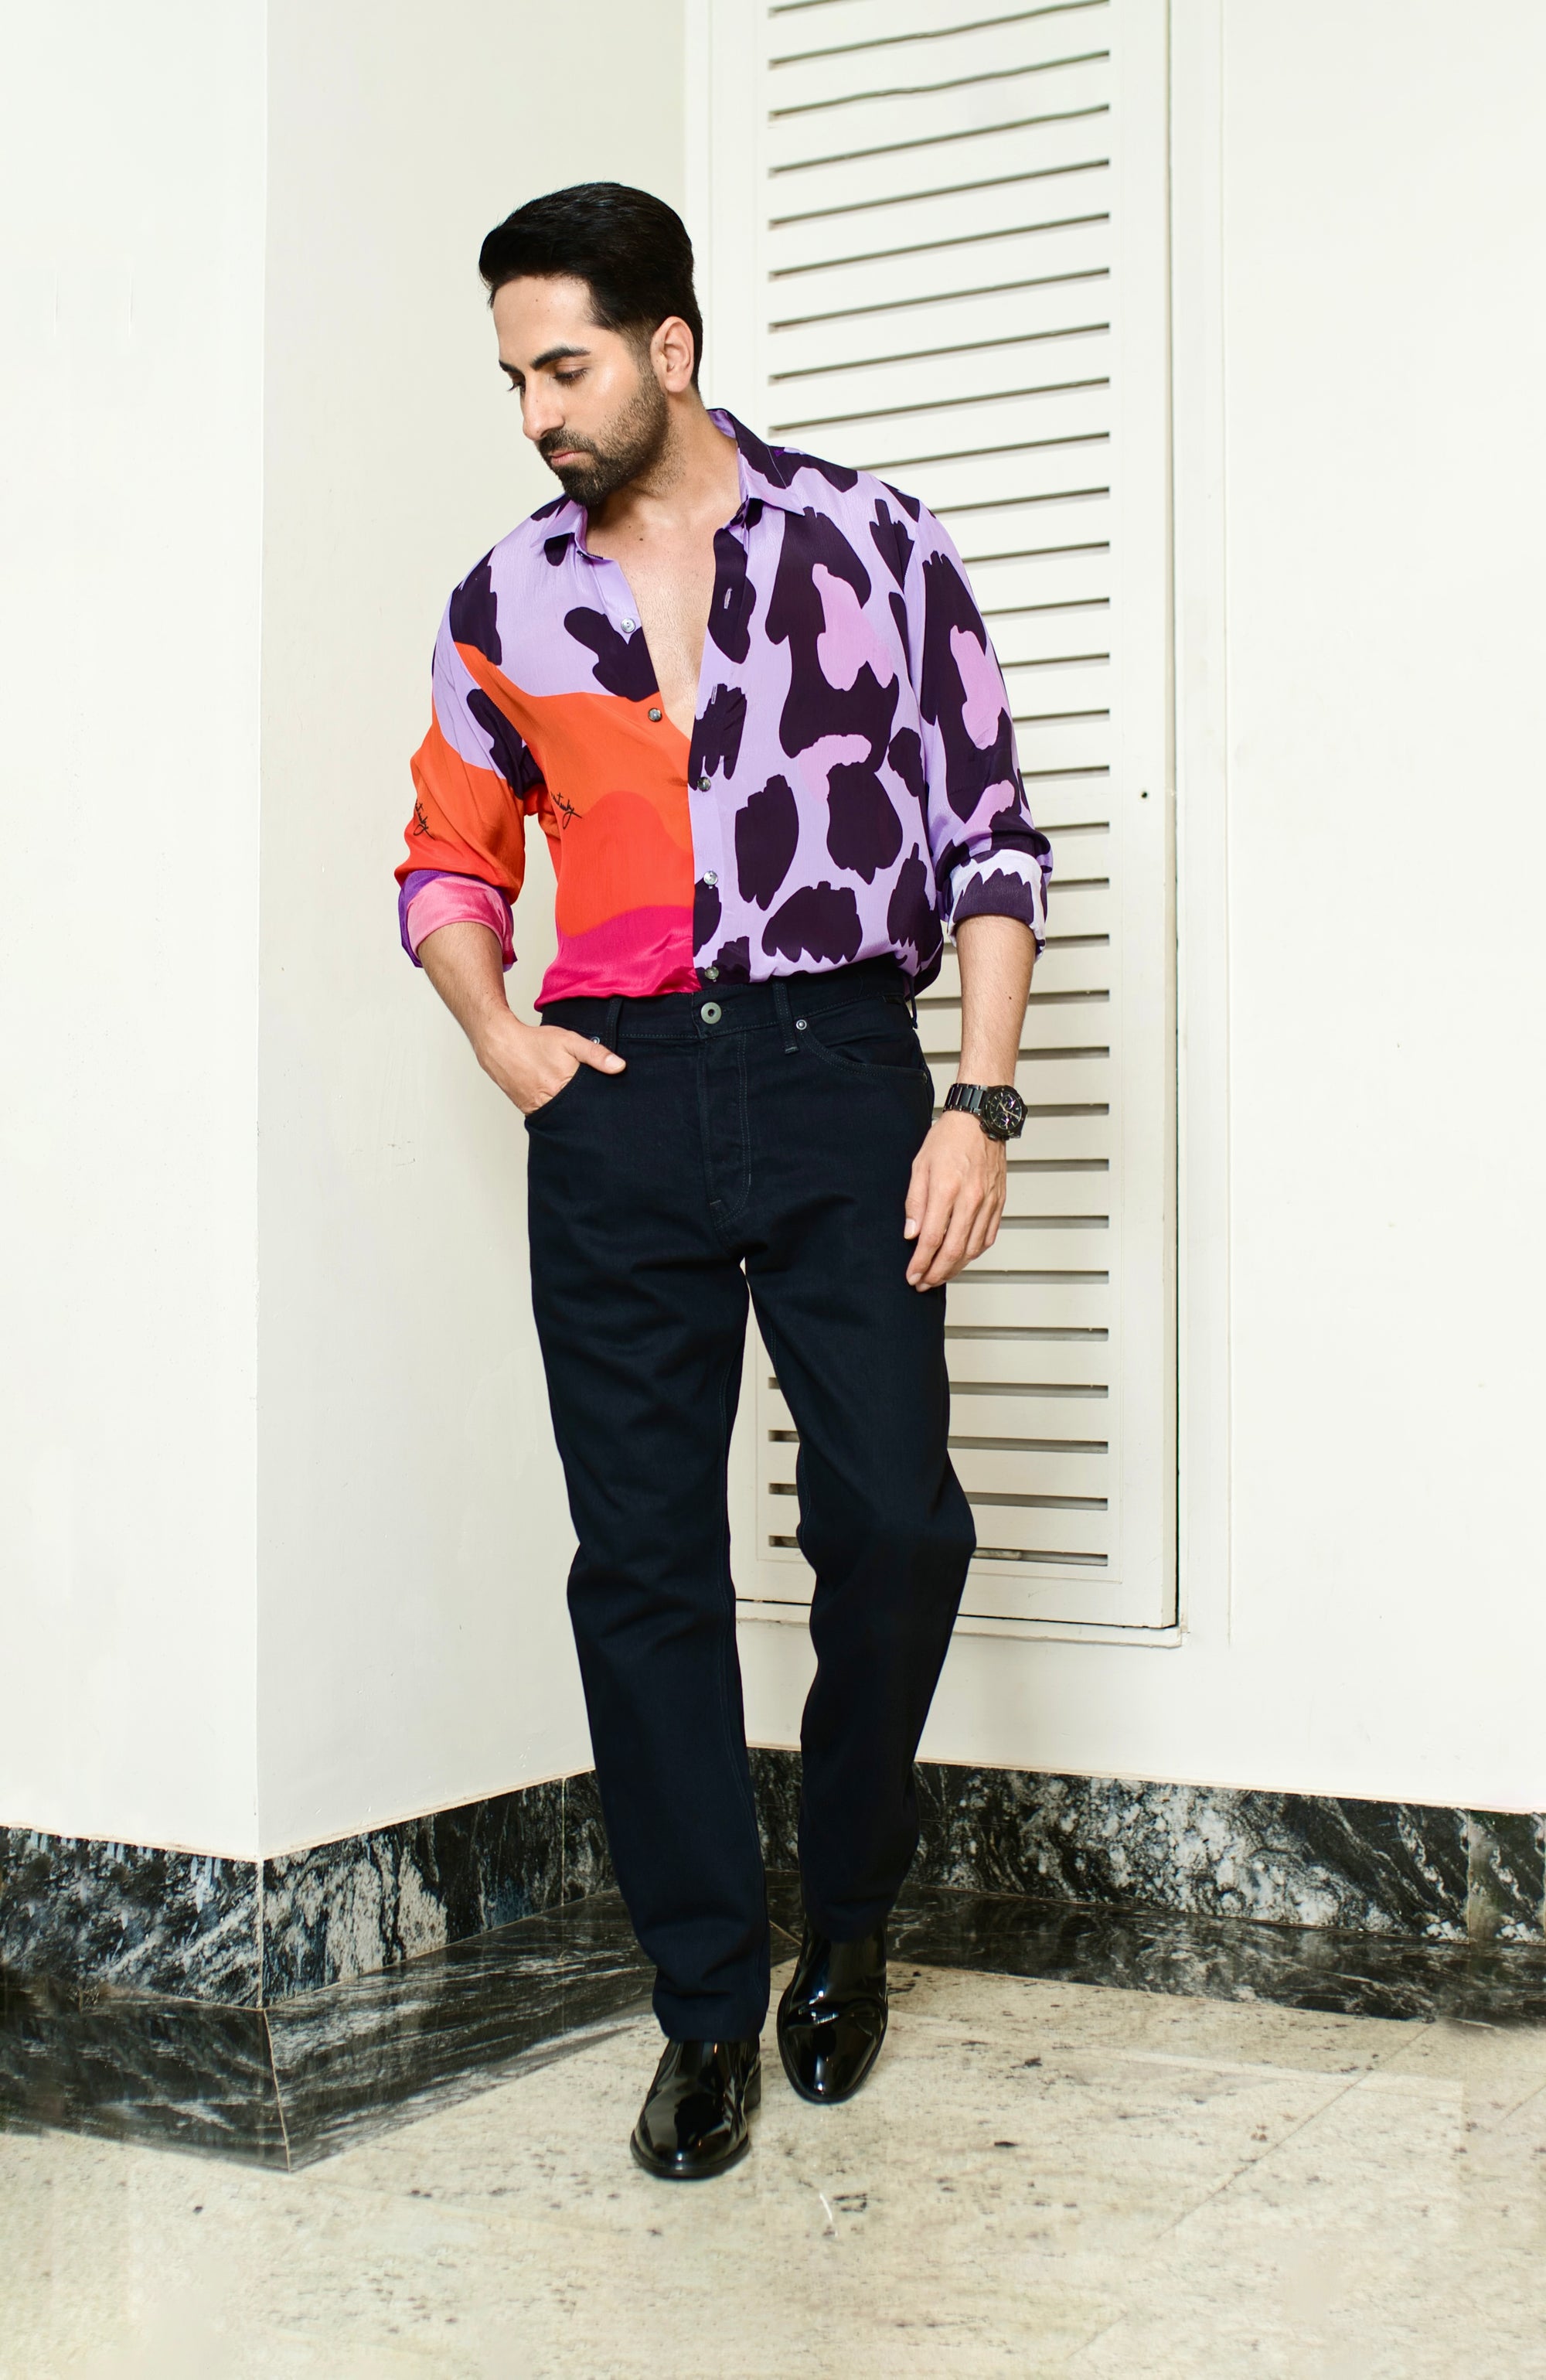 Ayushman Khurranna in our Eyes on me shirt